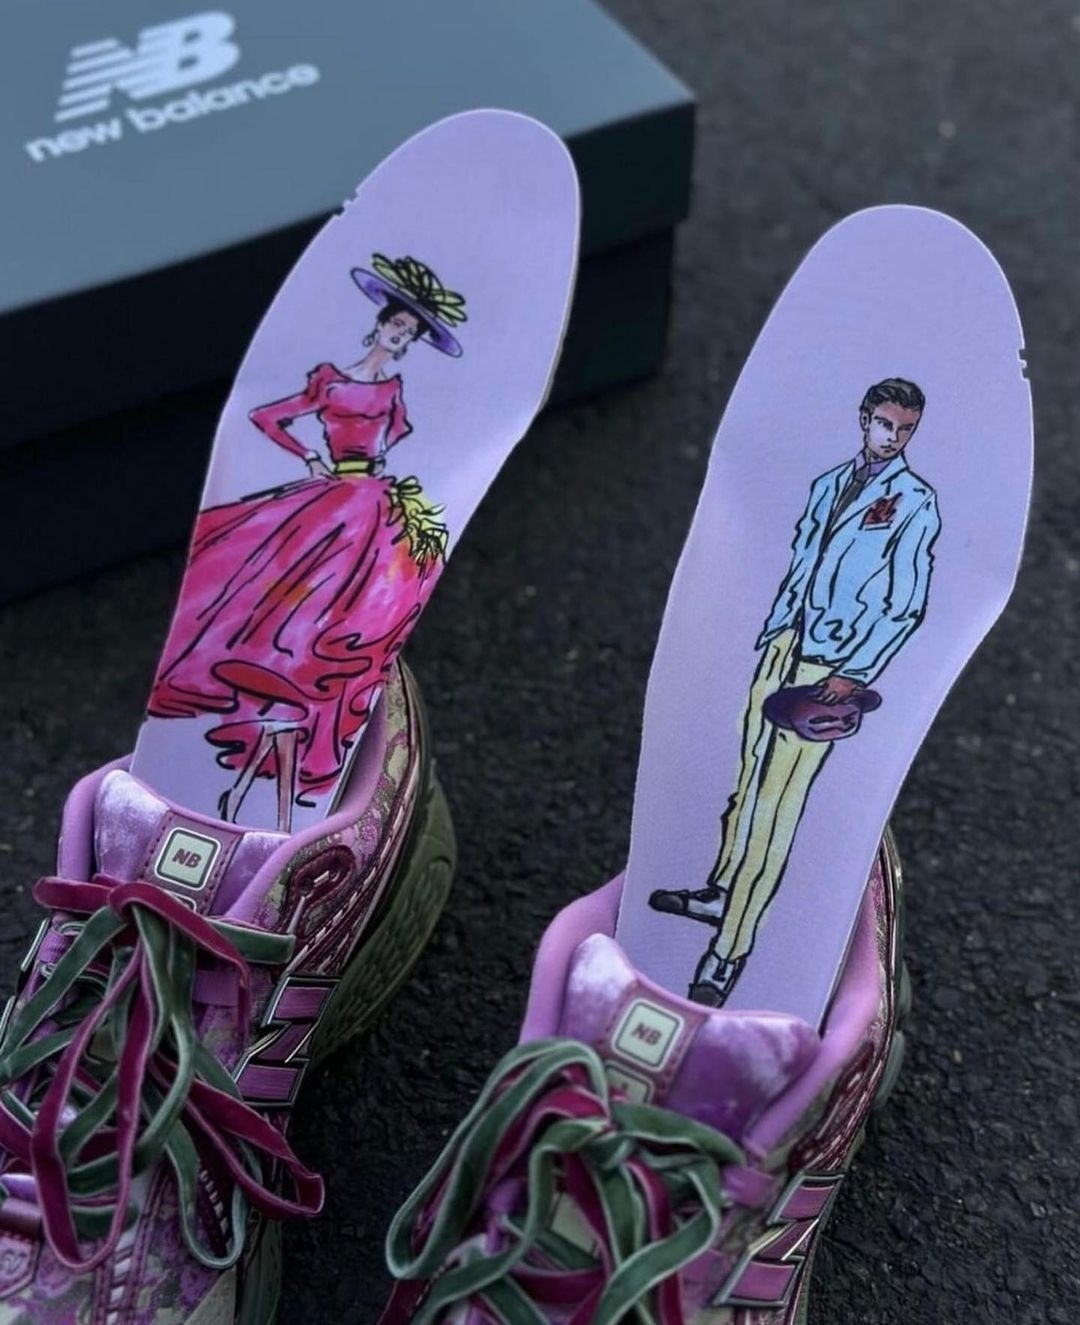 Illustrated insoles with a woman in a dress and a man in a suit against a purple background, atop New Balance shoes